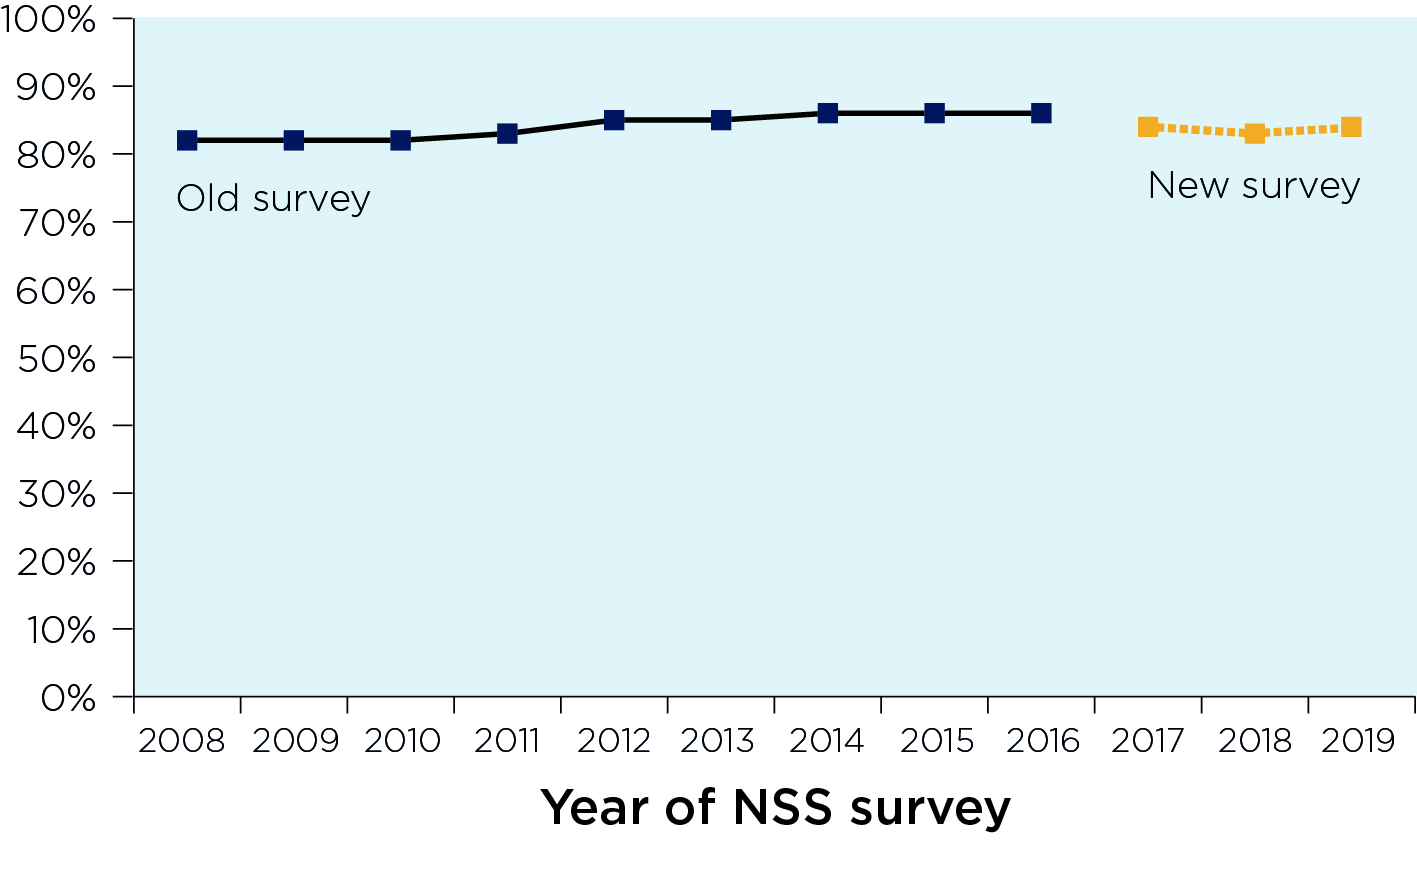 Figure 1: Students responding positively to the NSS question on overall satisfaction, 2008 to 2019